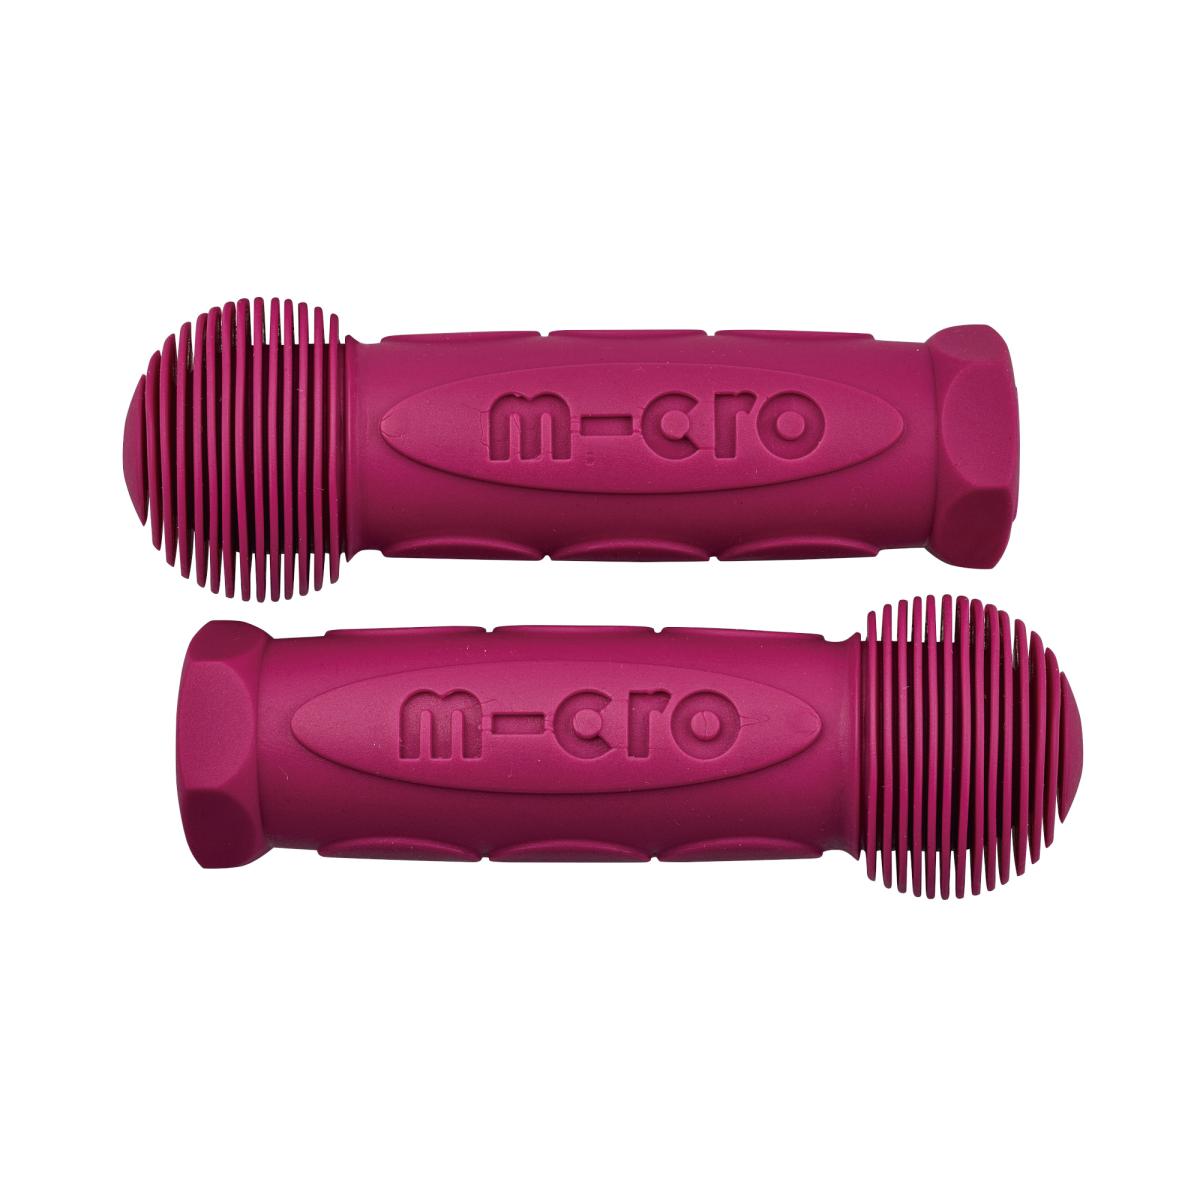 Grip Micro 4540 Berry Red - 01